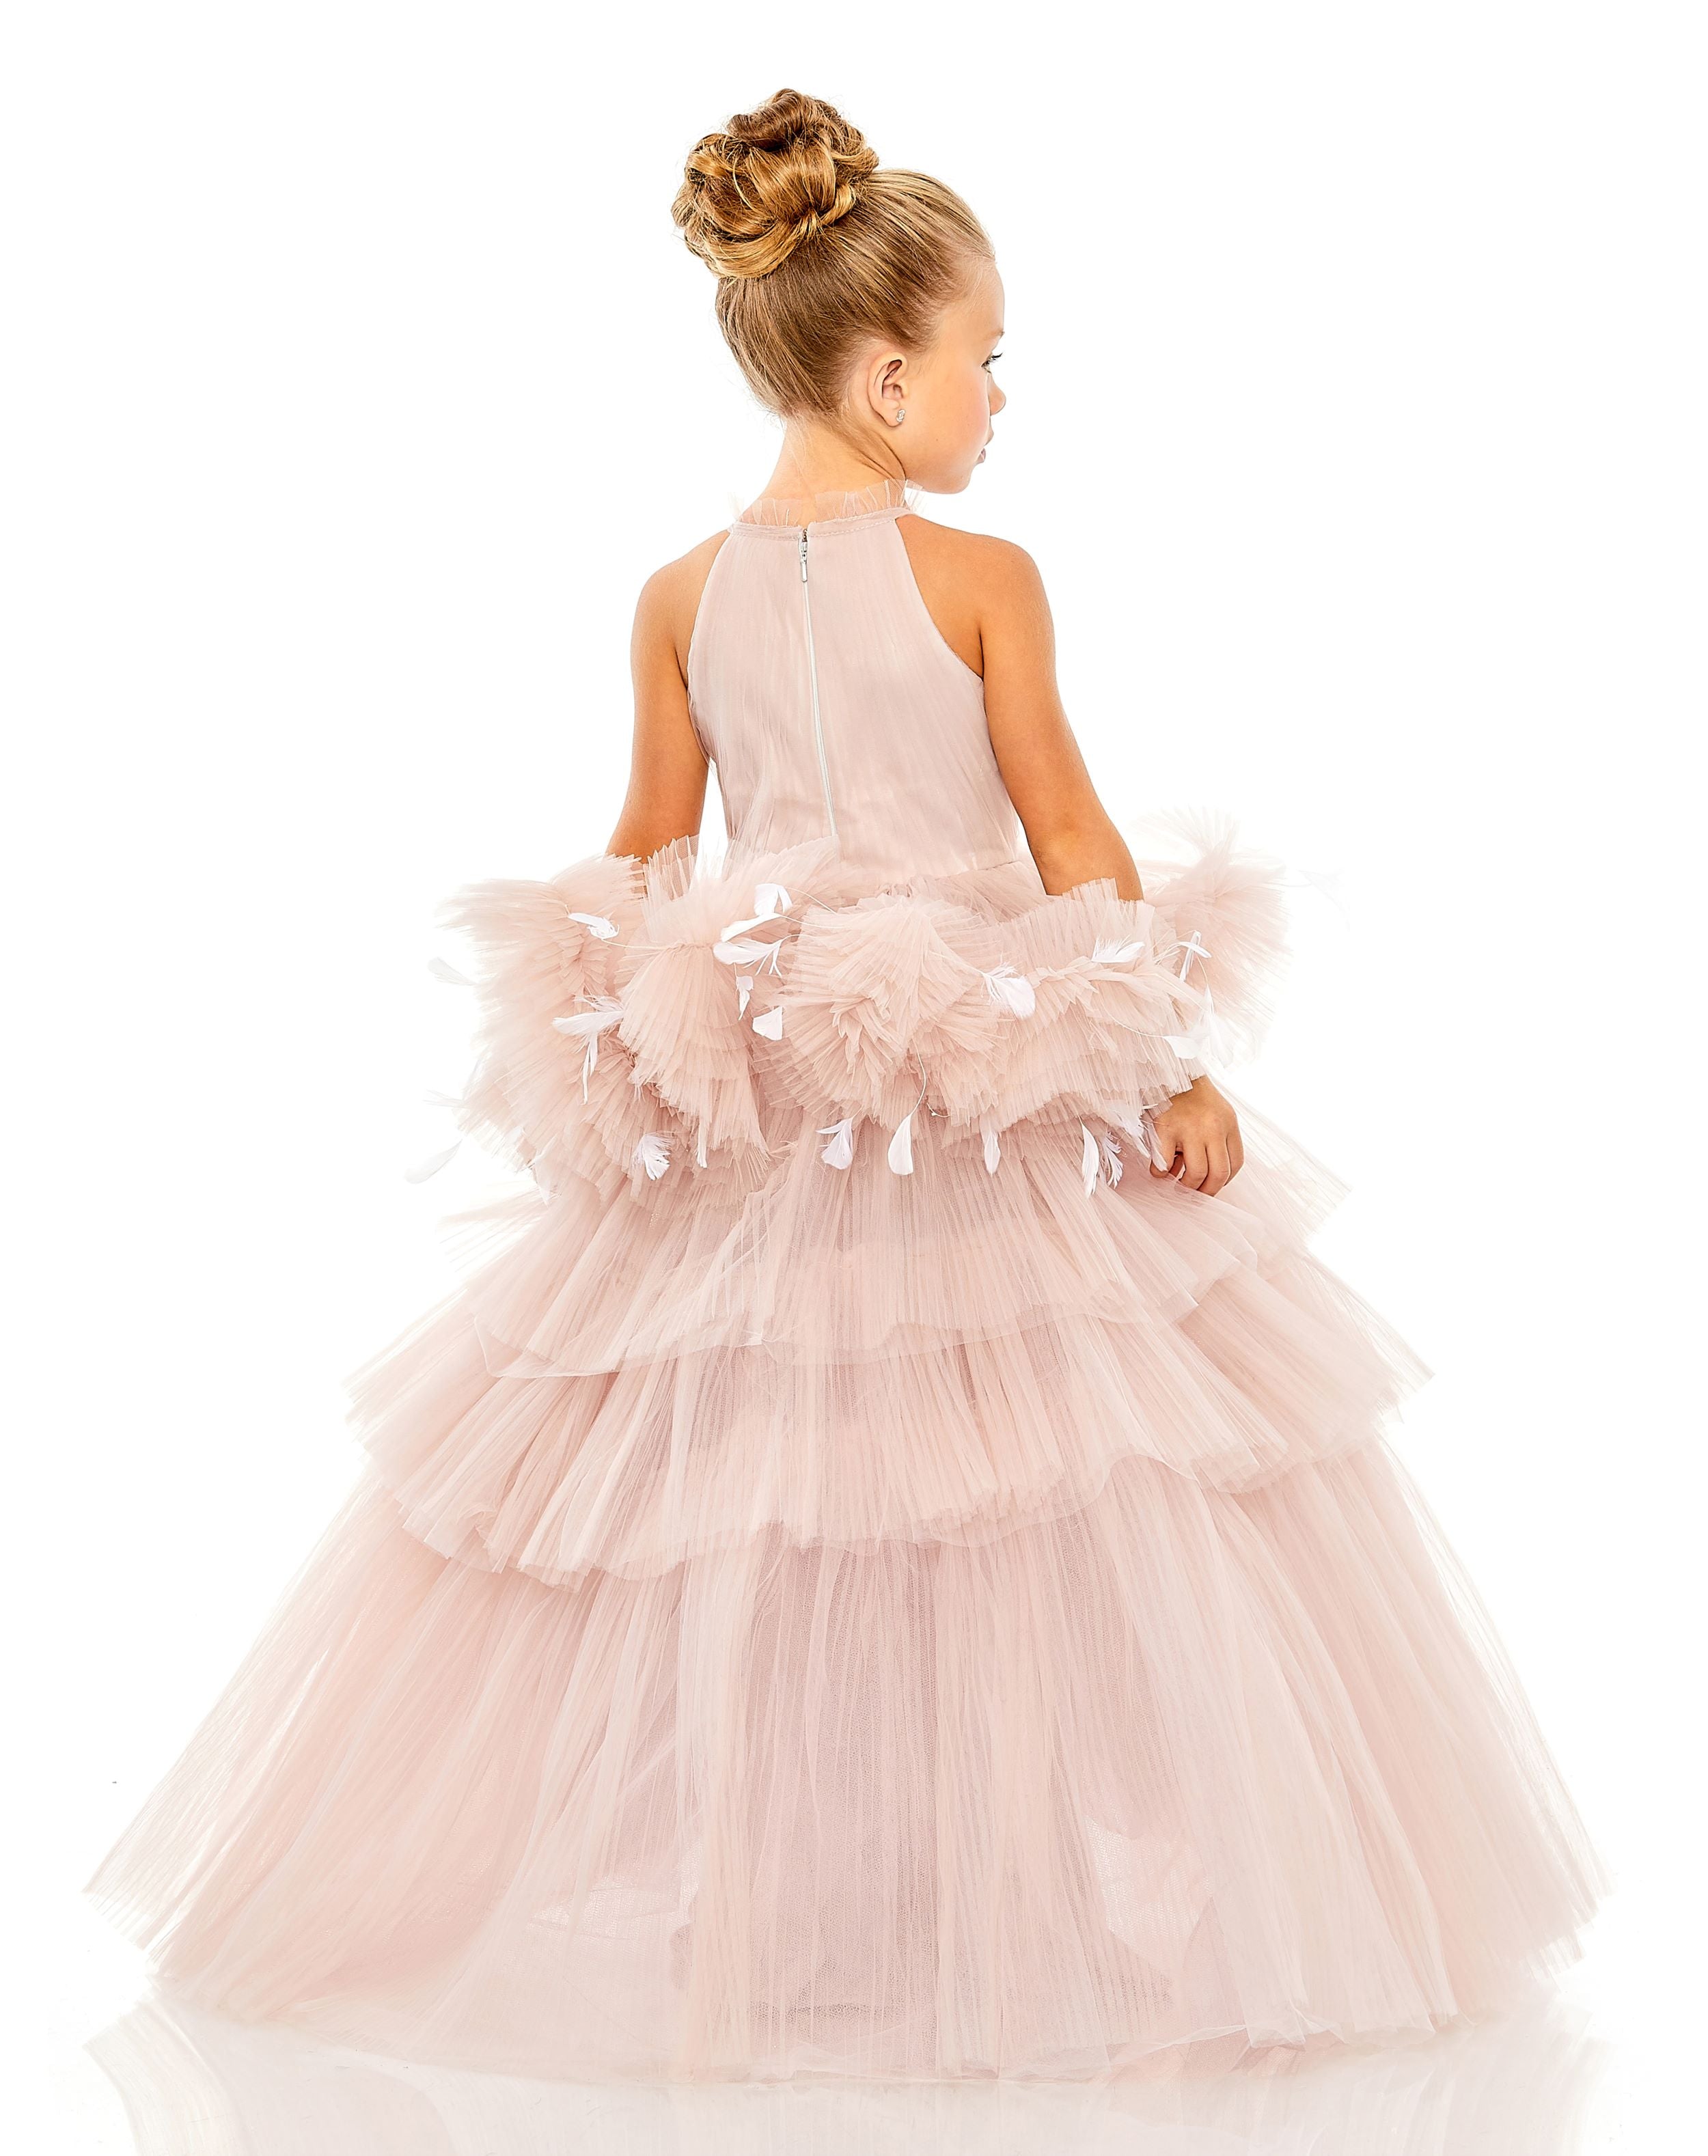 Girls High Neck Tulle Dress with Feather Detail